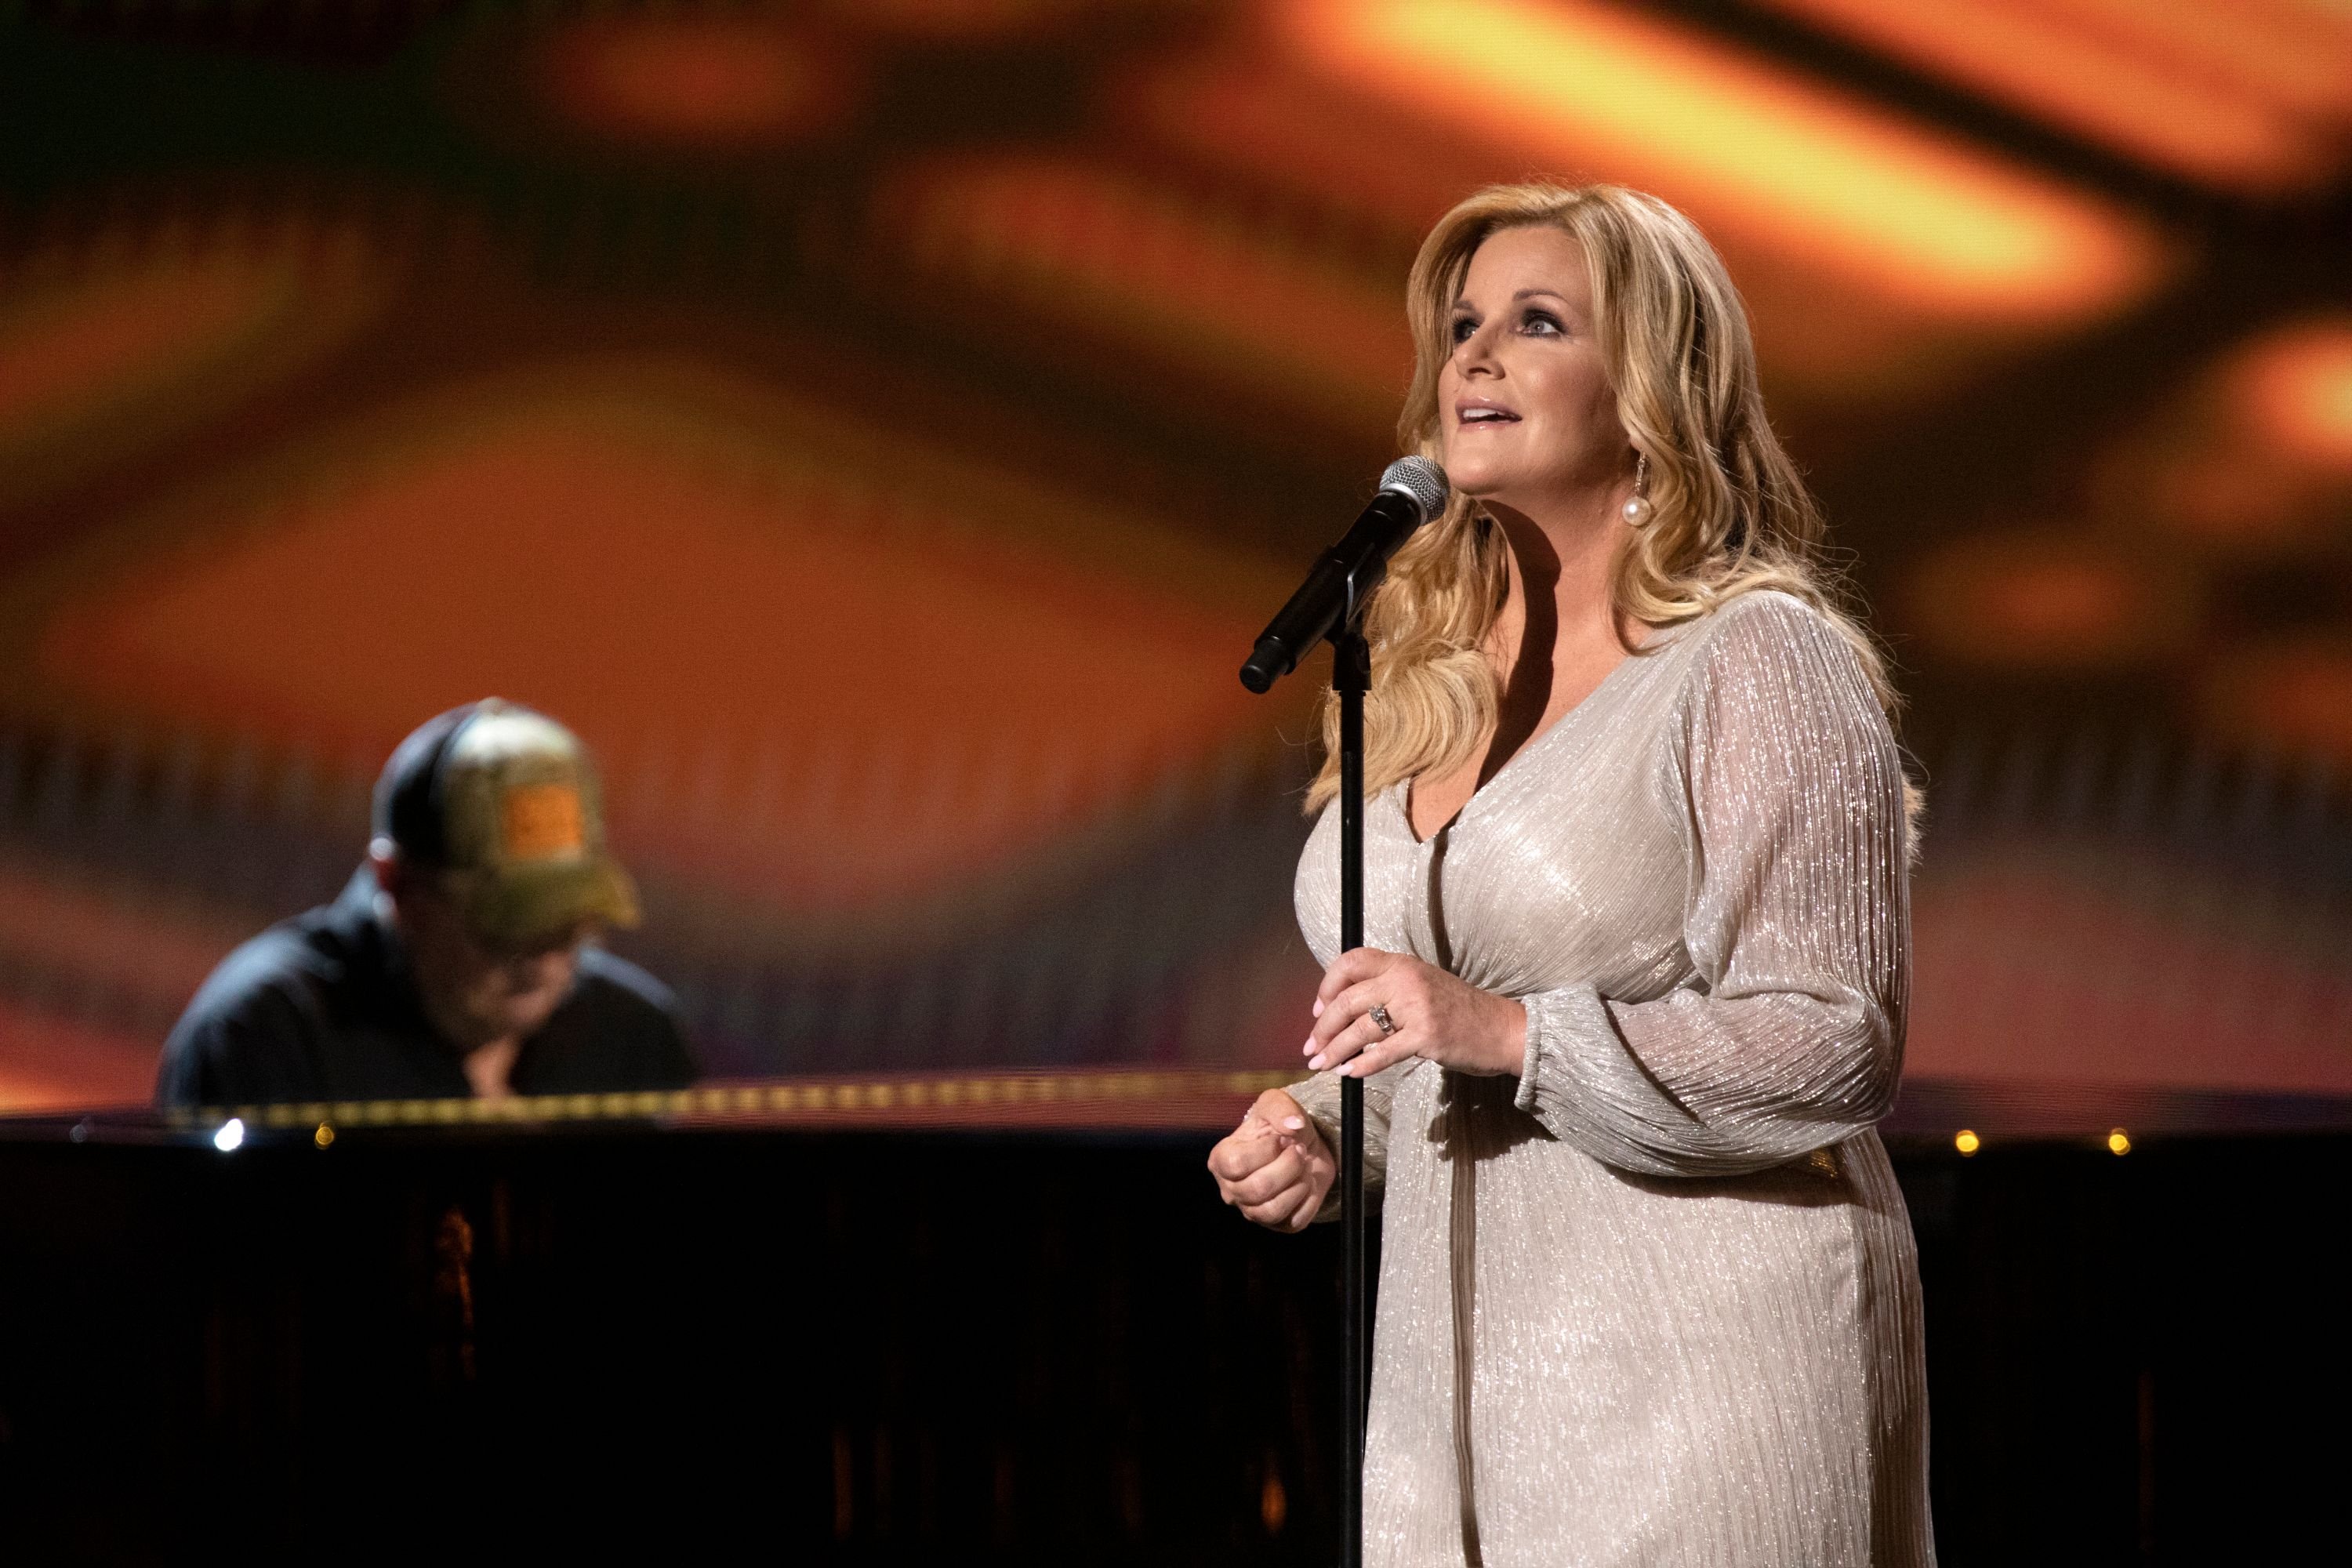 Trisha Yearwood at the 55th Academy of Country Music Awards in 2020 in Nashville, Tennessee | Photo: Getty Images